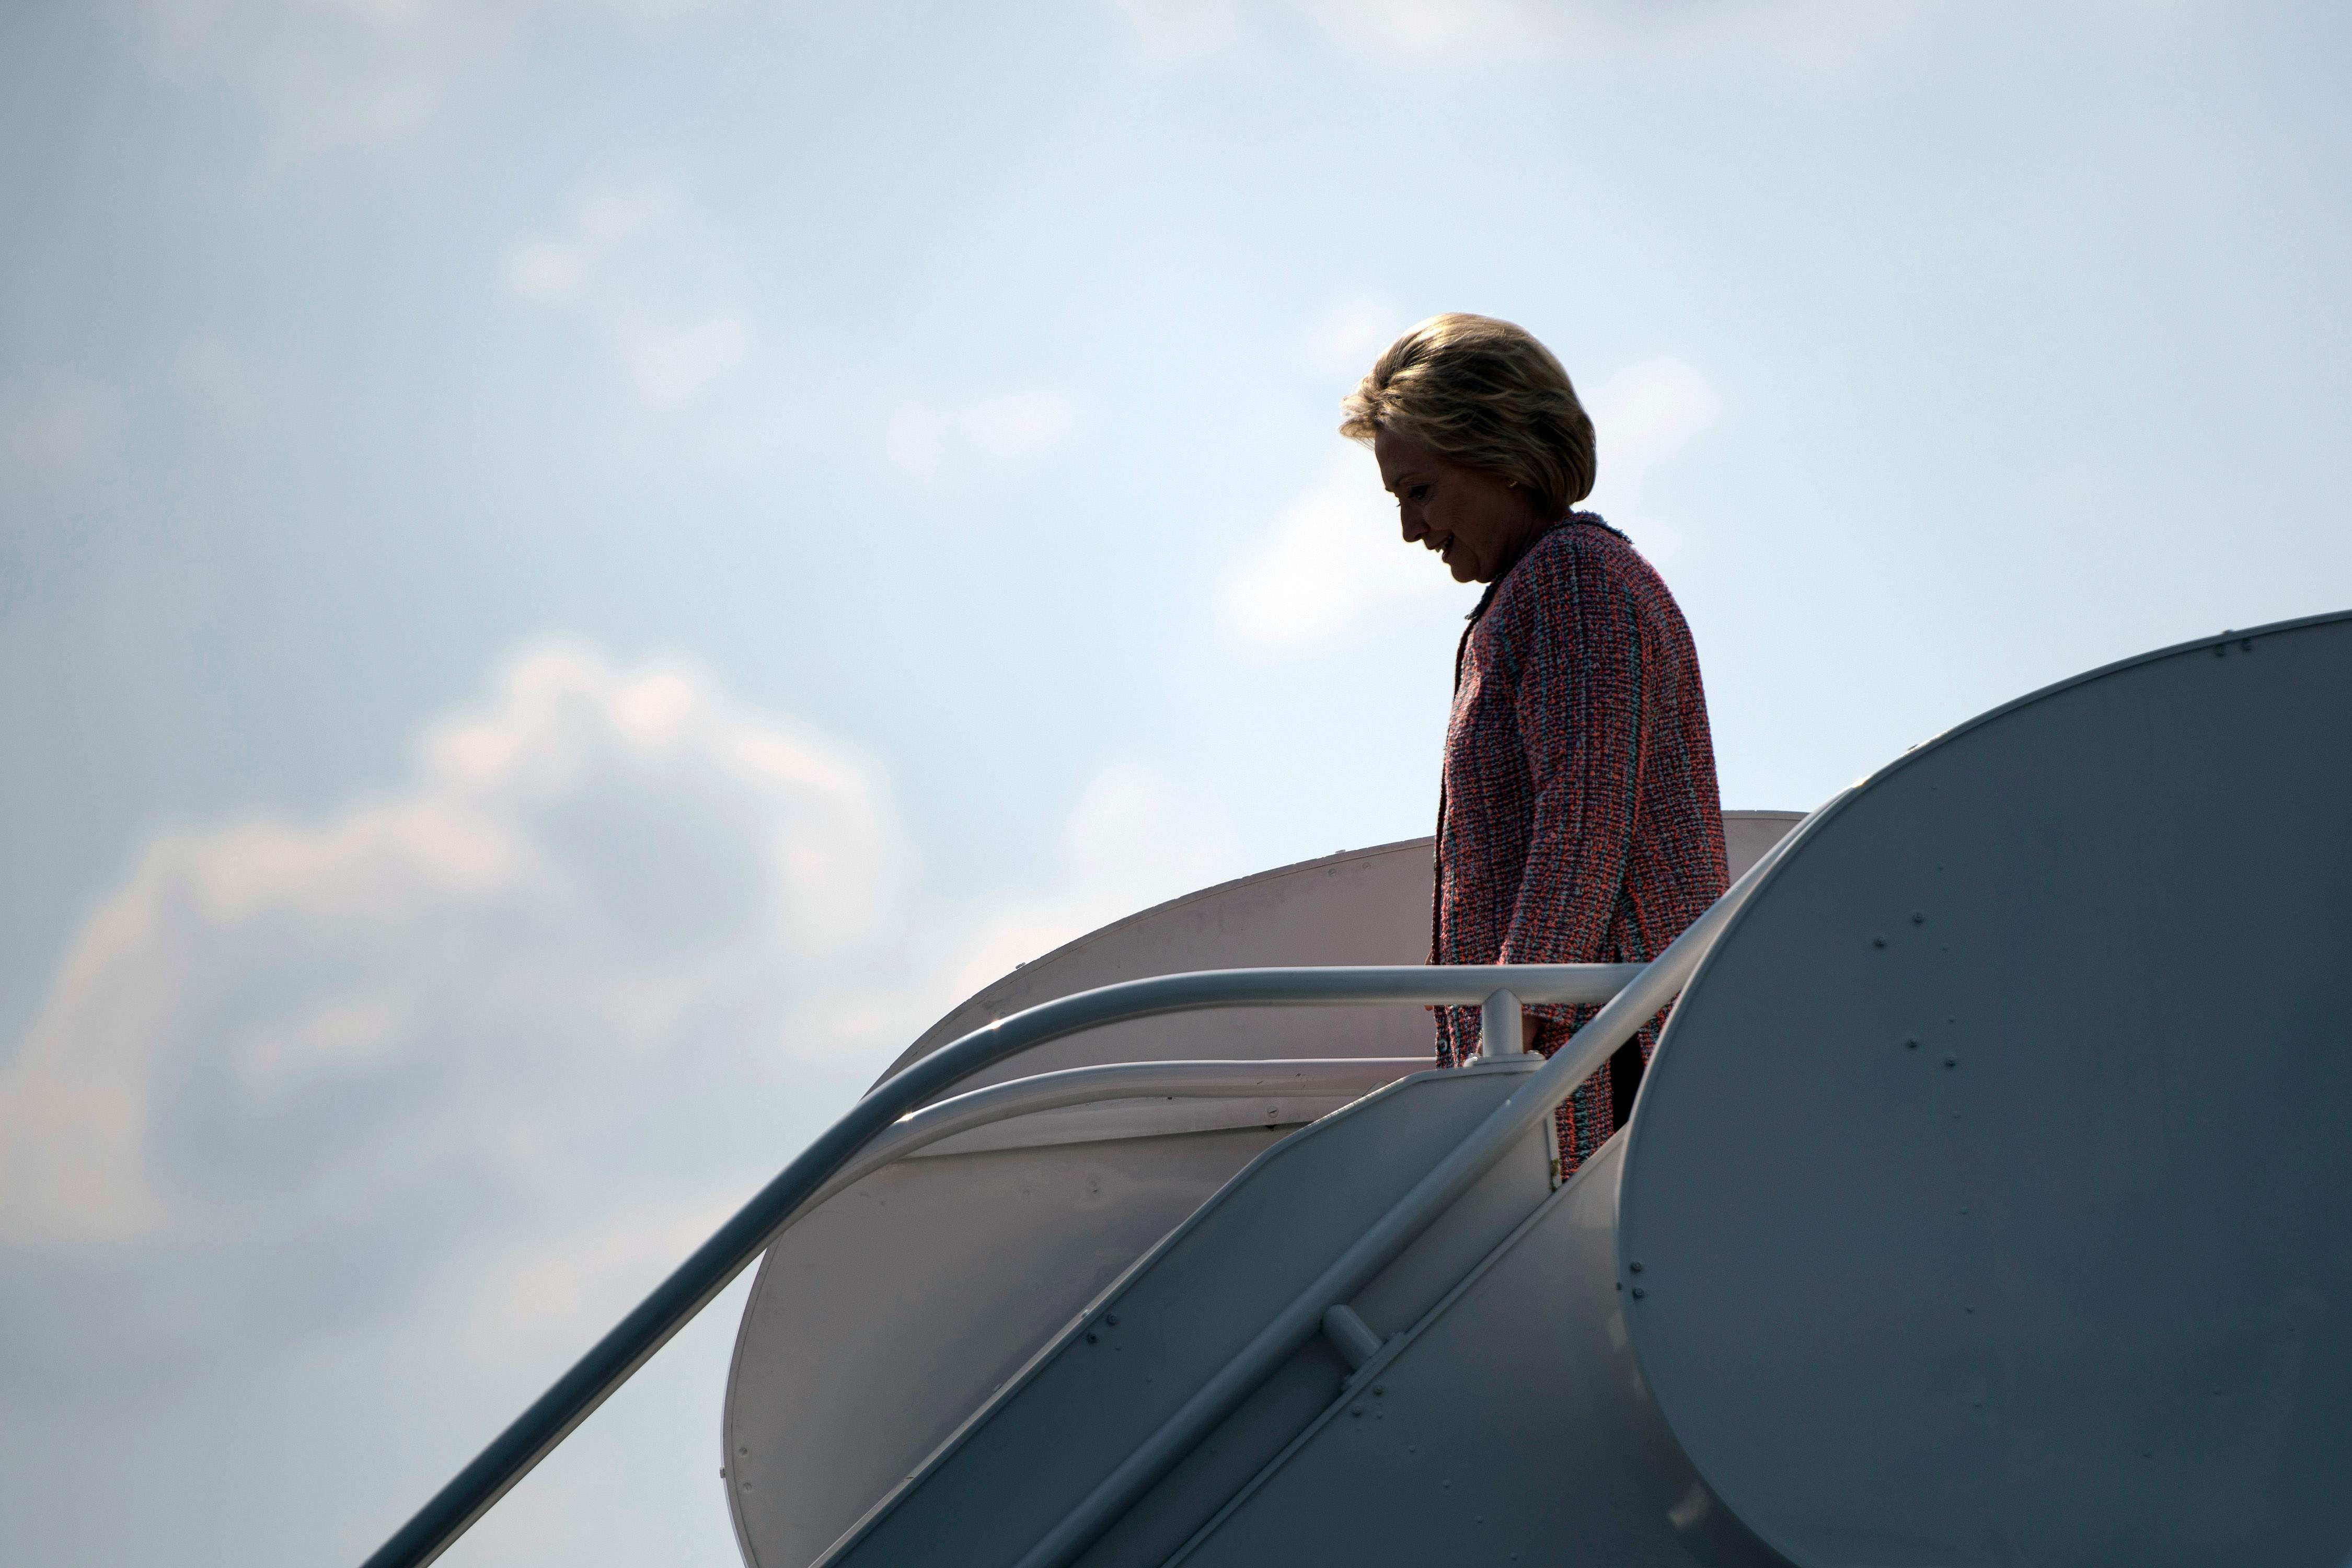 Hillary Clinton arrives at Piedmont Triad International Airport on Sept. 15, 2016 in Greensboro, NC. (Brendan Smialowski—AFP/Getty Images)